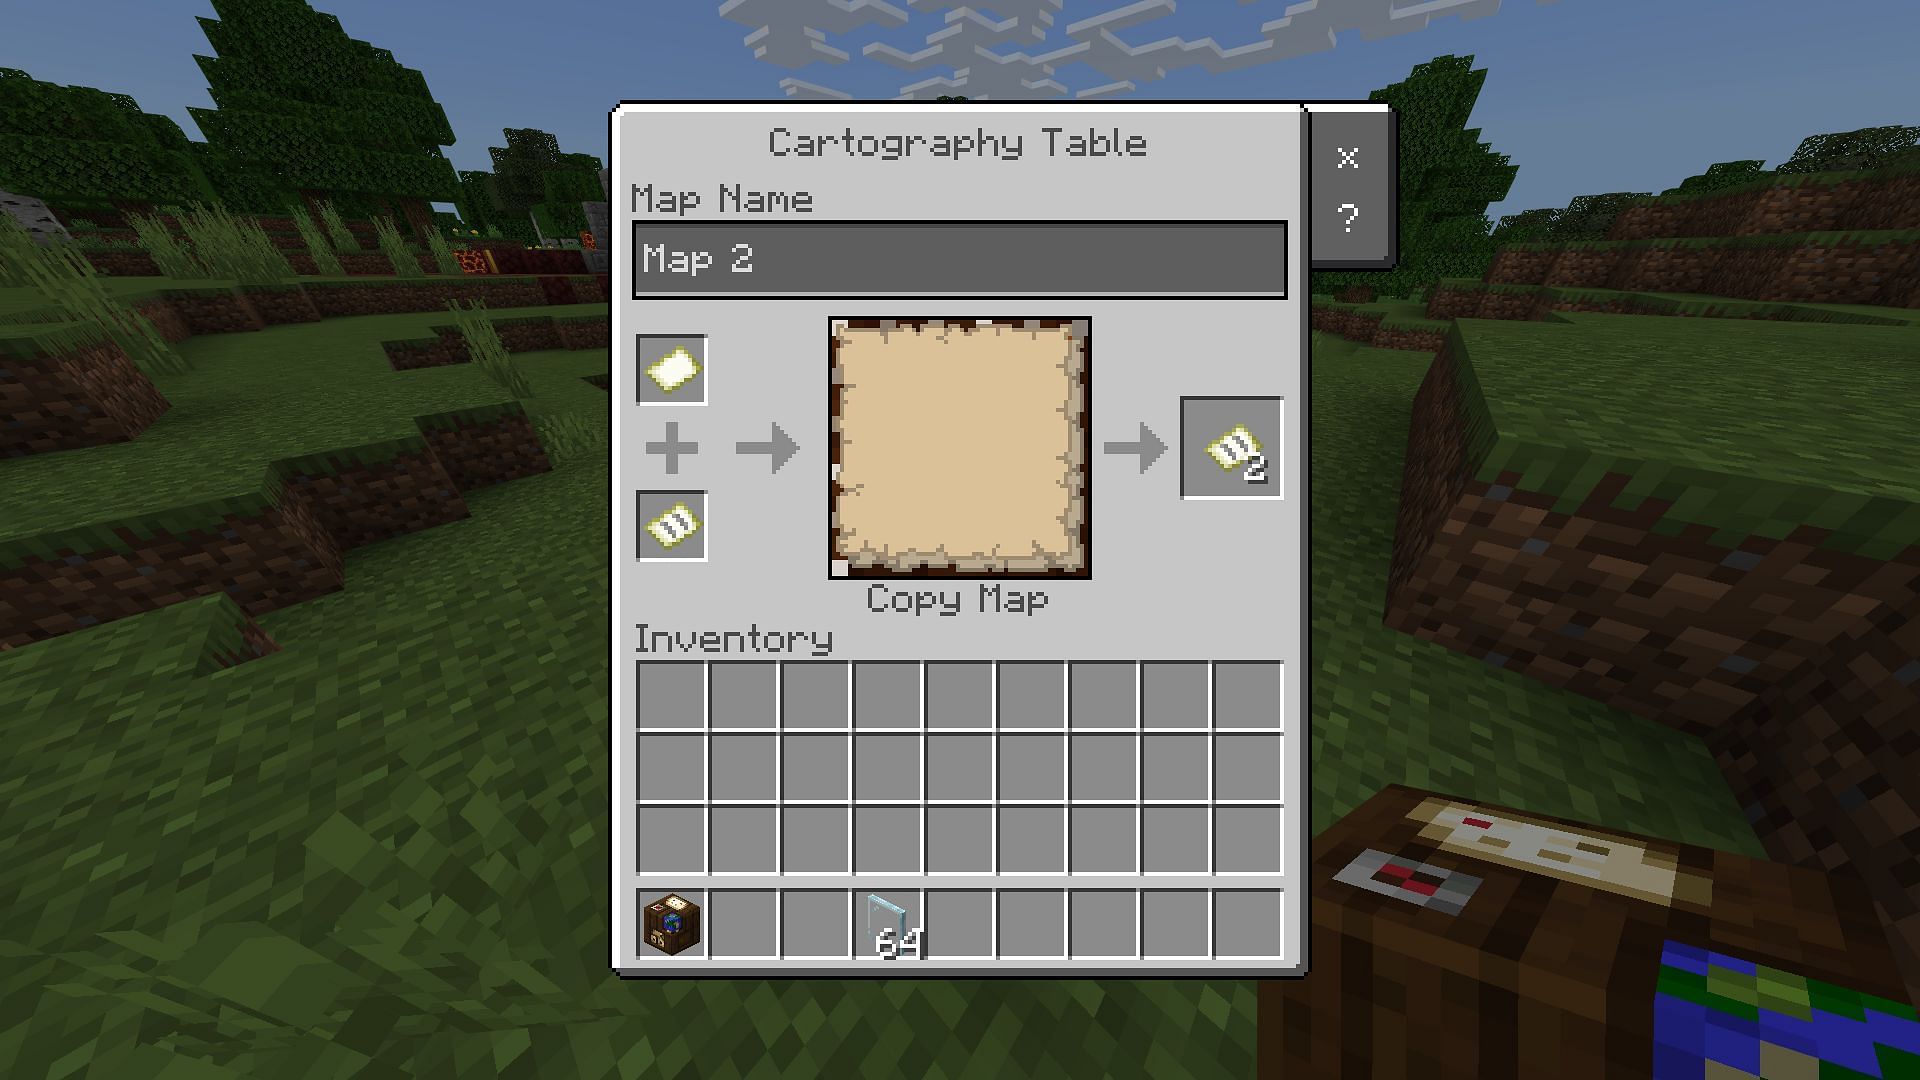 Players can clone an existing map to provide copies when needed (Image via Mojang)